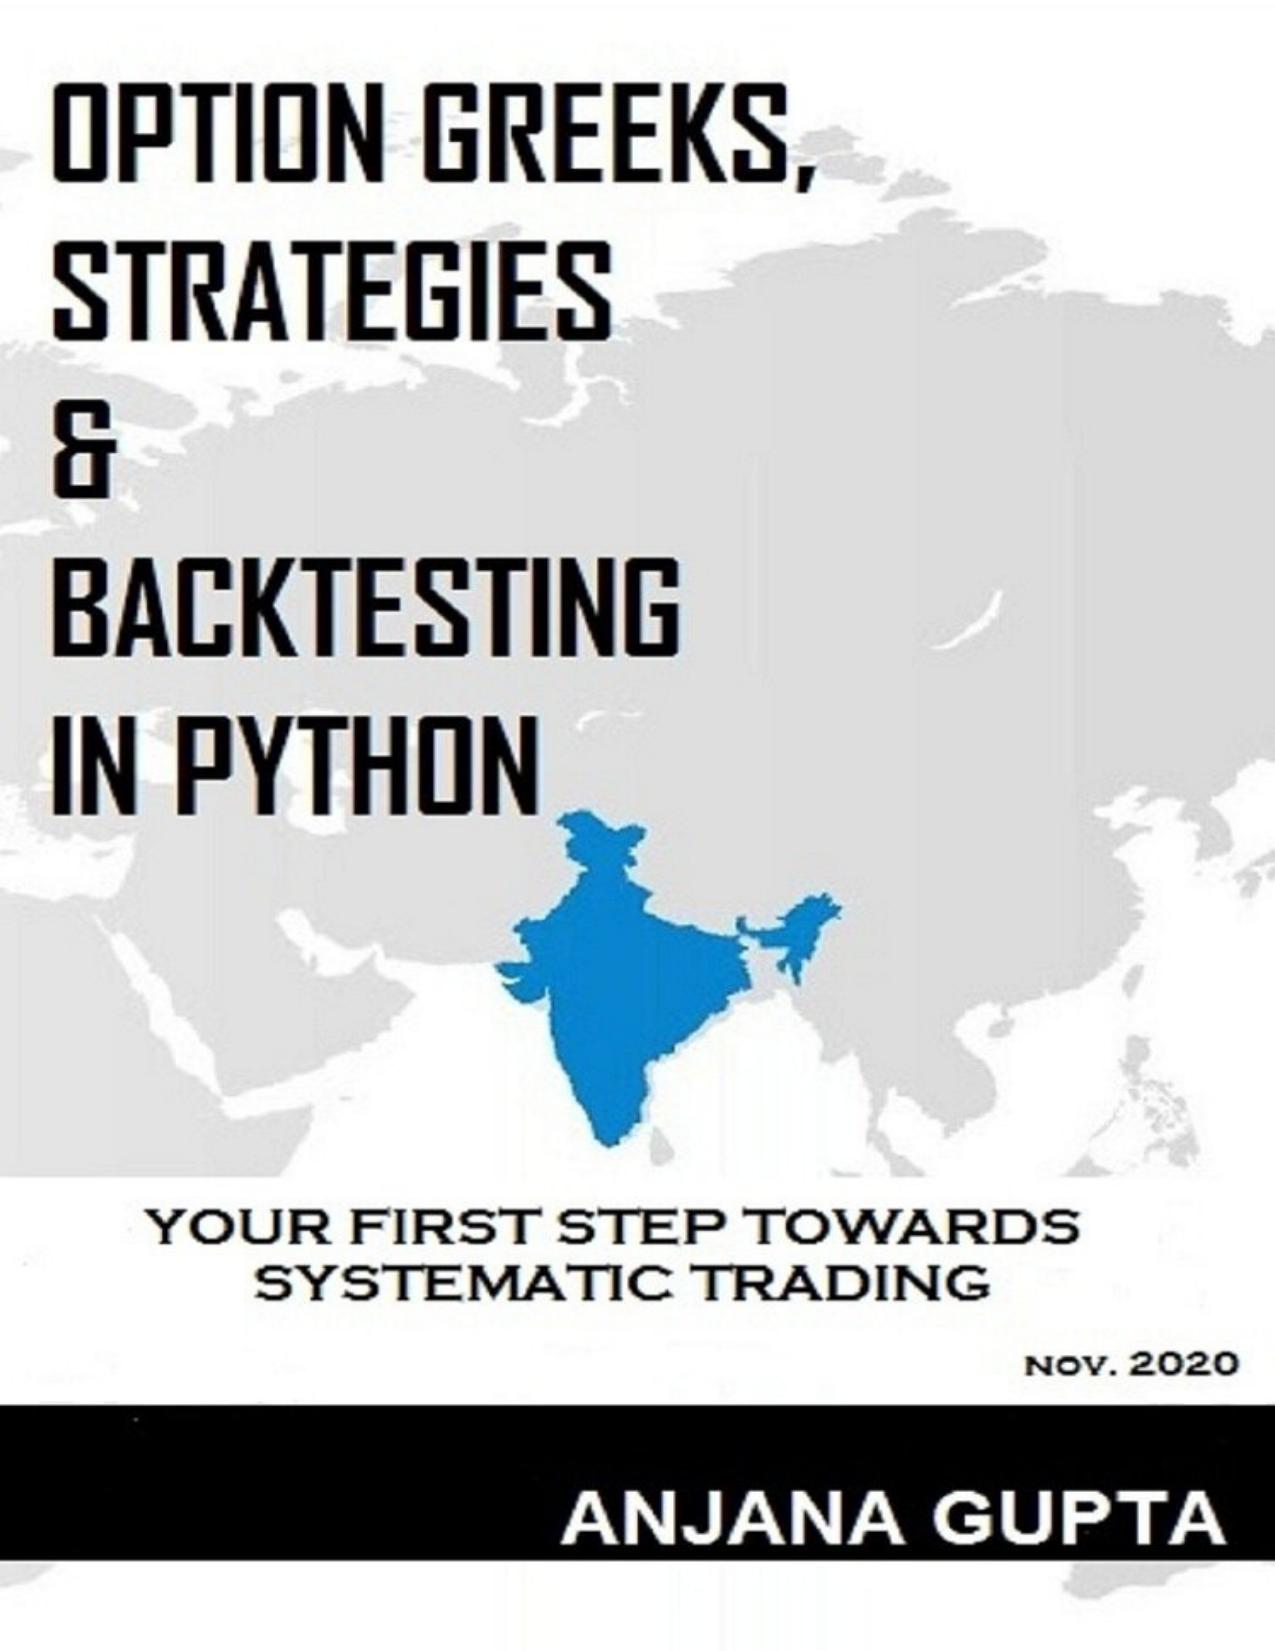 Option Greeks, Strategies & Backtesting in Python: Your first step towards systematic trading